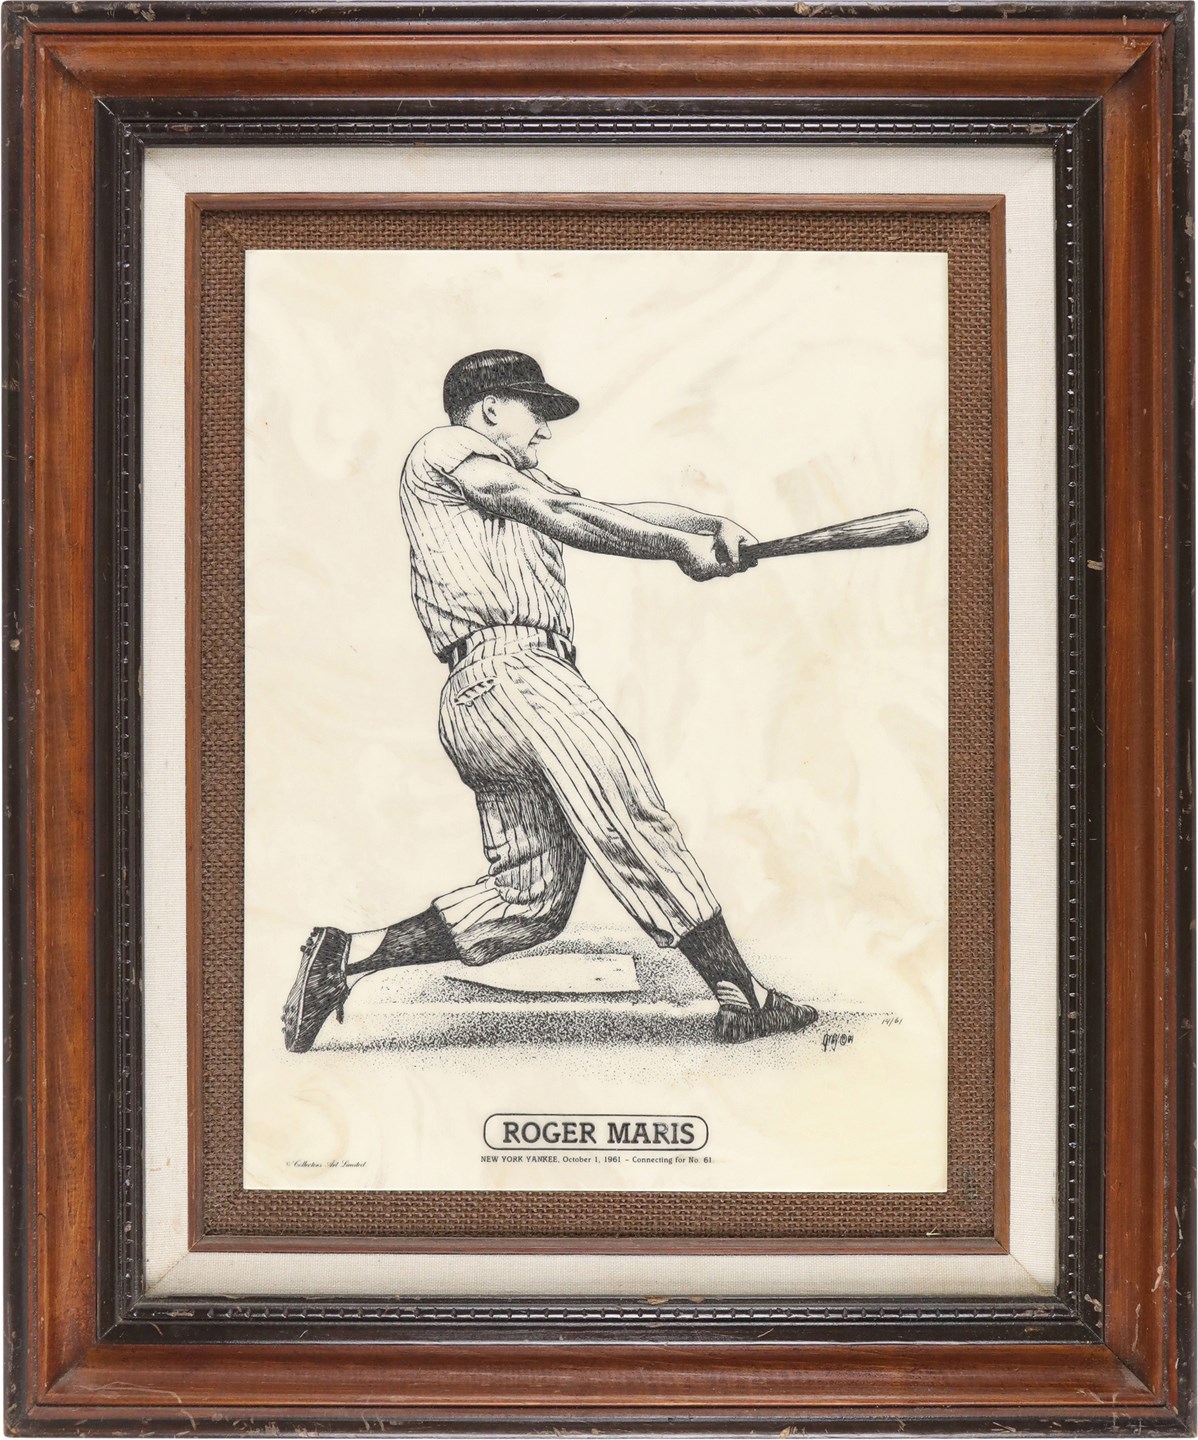 Baseball Autographs - Roger Maris "61 Home Runs" Marble Etching #14/61 with Signed Roger Maris LOA (PSA)